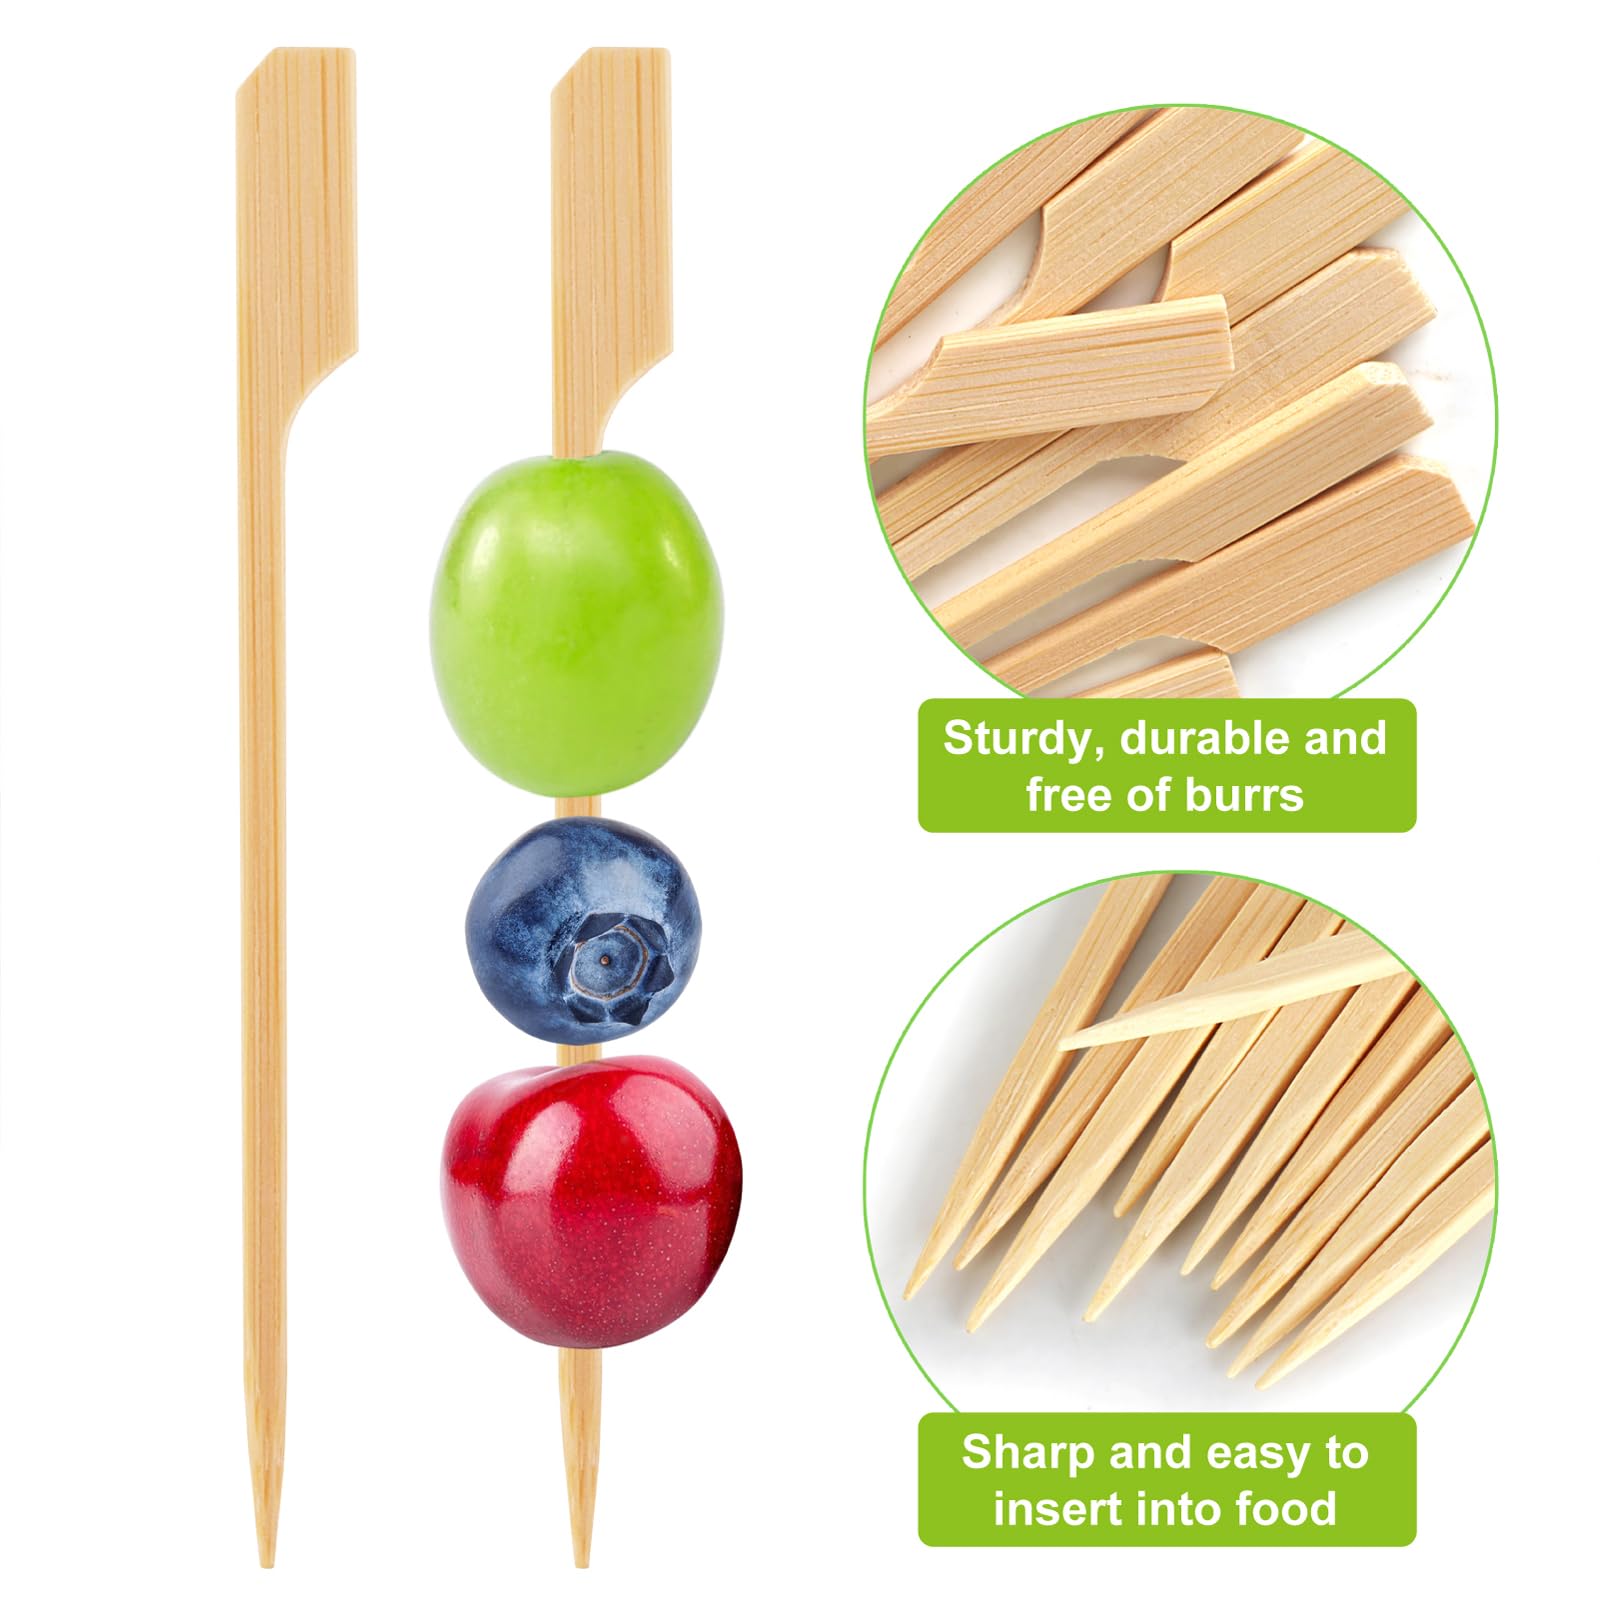 300PCS Cocktail Picks Bamboo Skewers For Appetizers, FATLODA Paddle Wooden Skewers, Fancy Flat Toothpicks For Appetizers, 4.7 IN Bamboo Sticks For Party Sandwich Fruit Charcuterie Boards Accessories